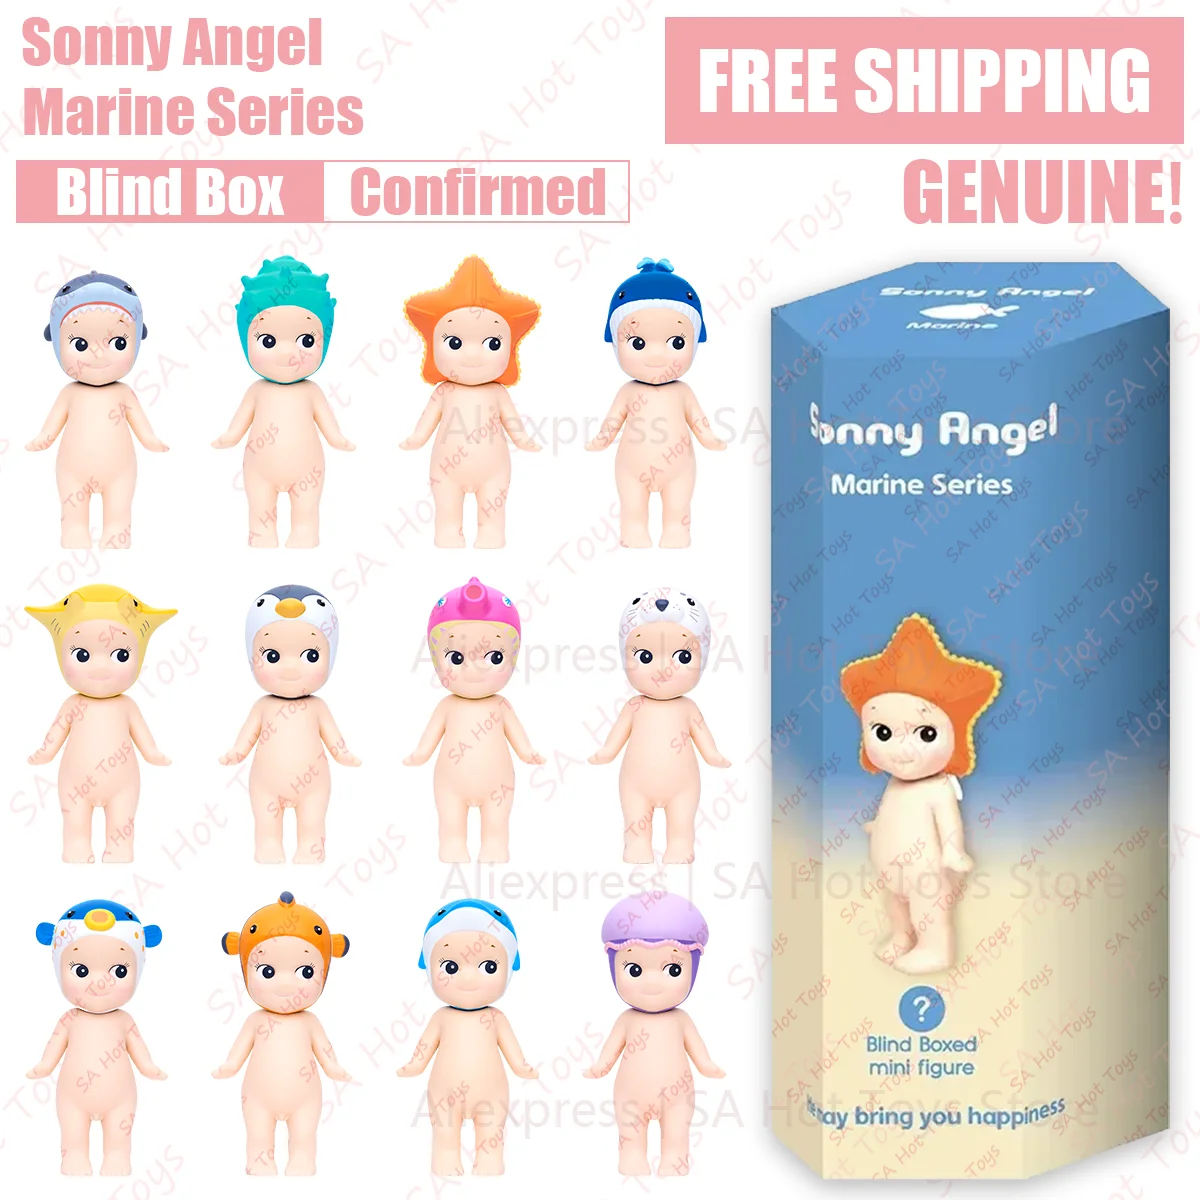 

Sonny Angel Marine Series Blind Box Confirmed style Genuine telephone Screen Decoration Birthday Gift Mysterious Surprise